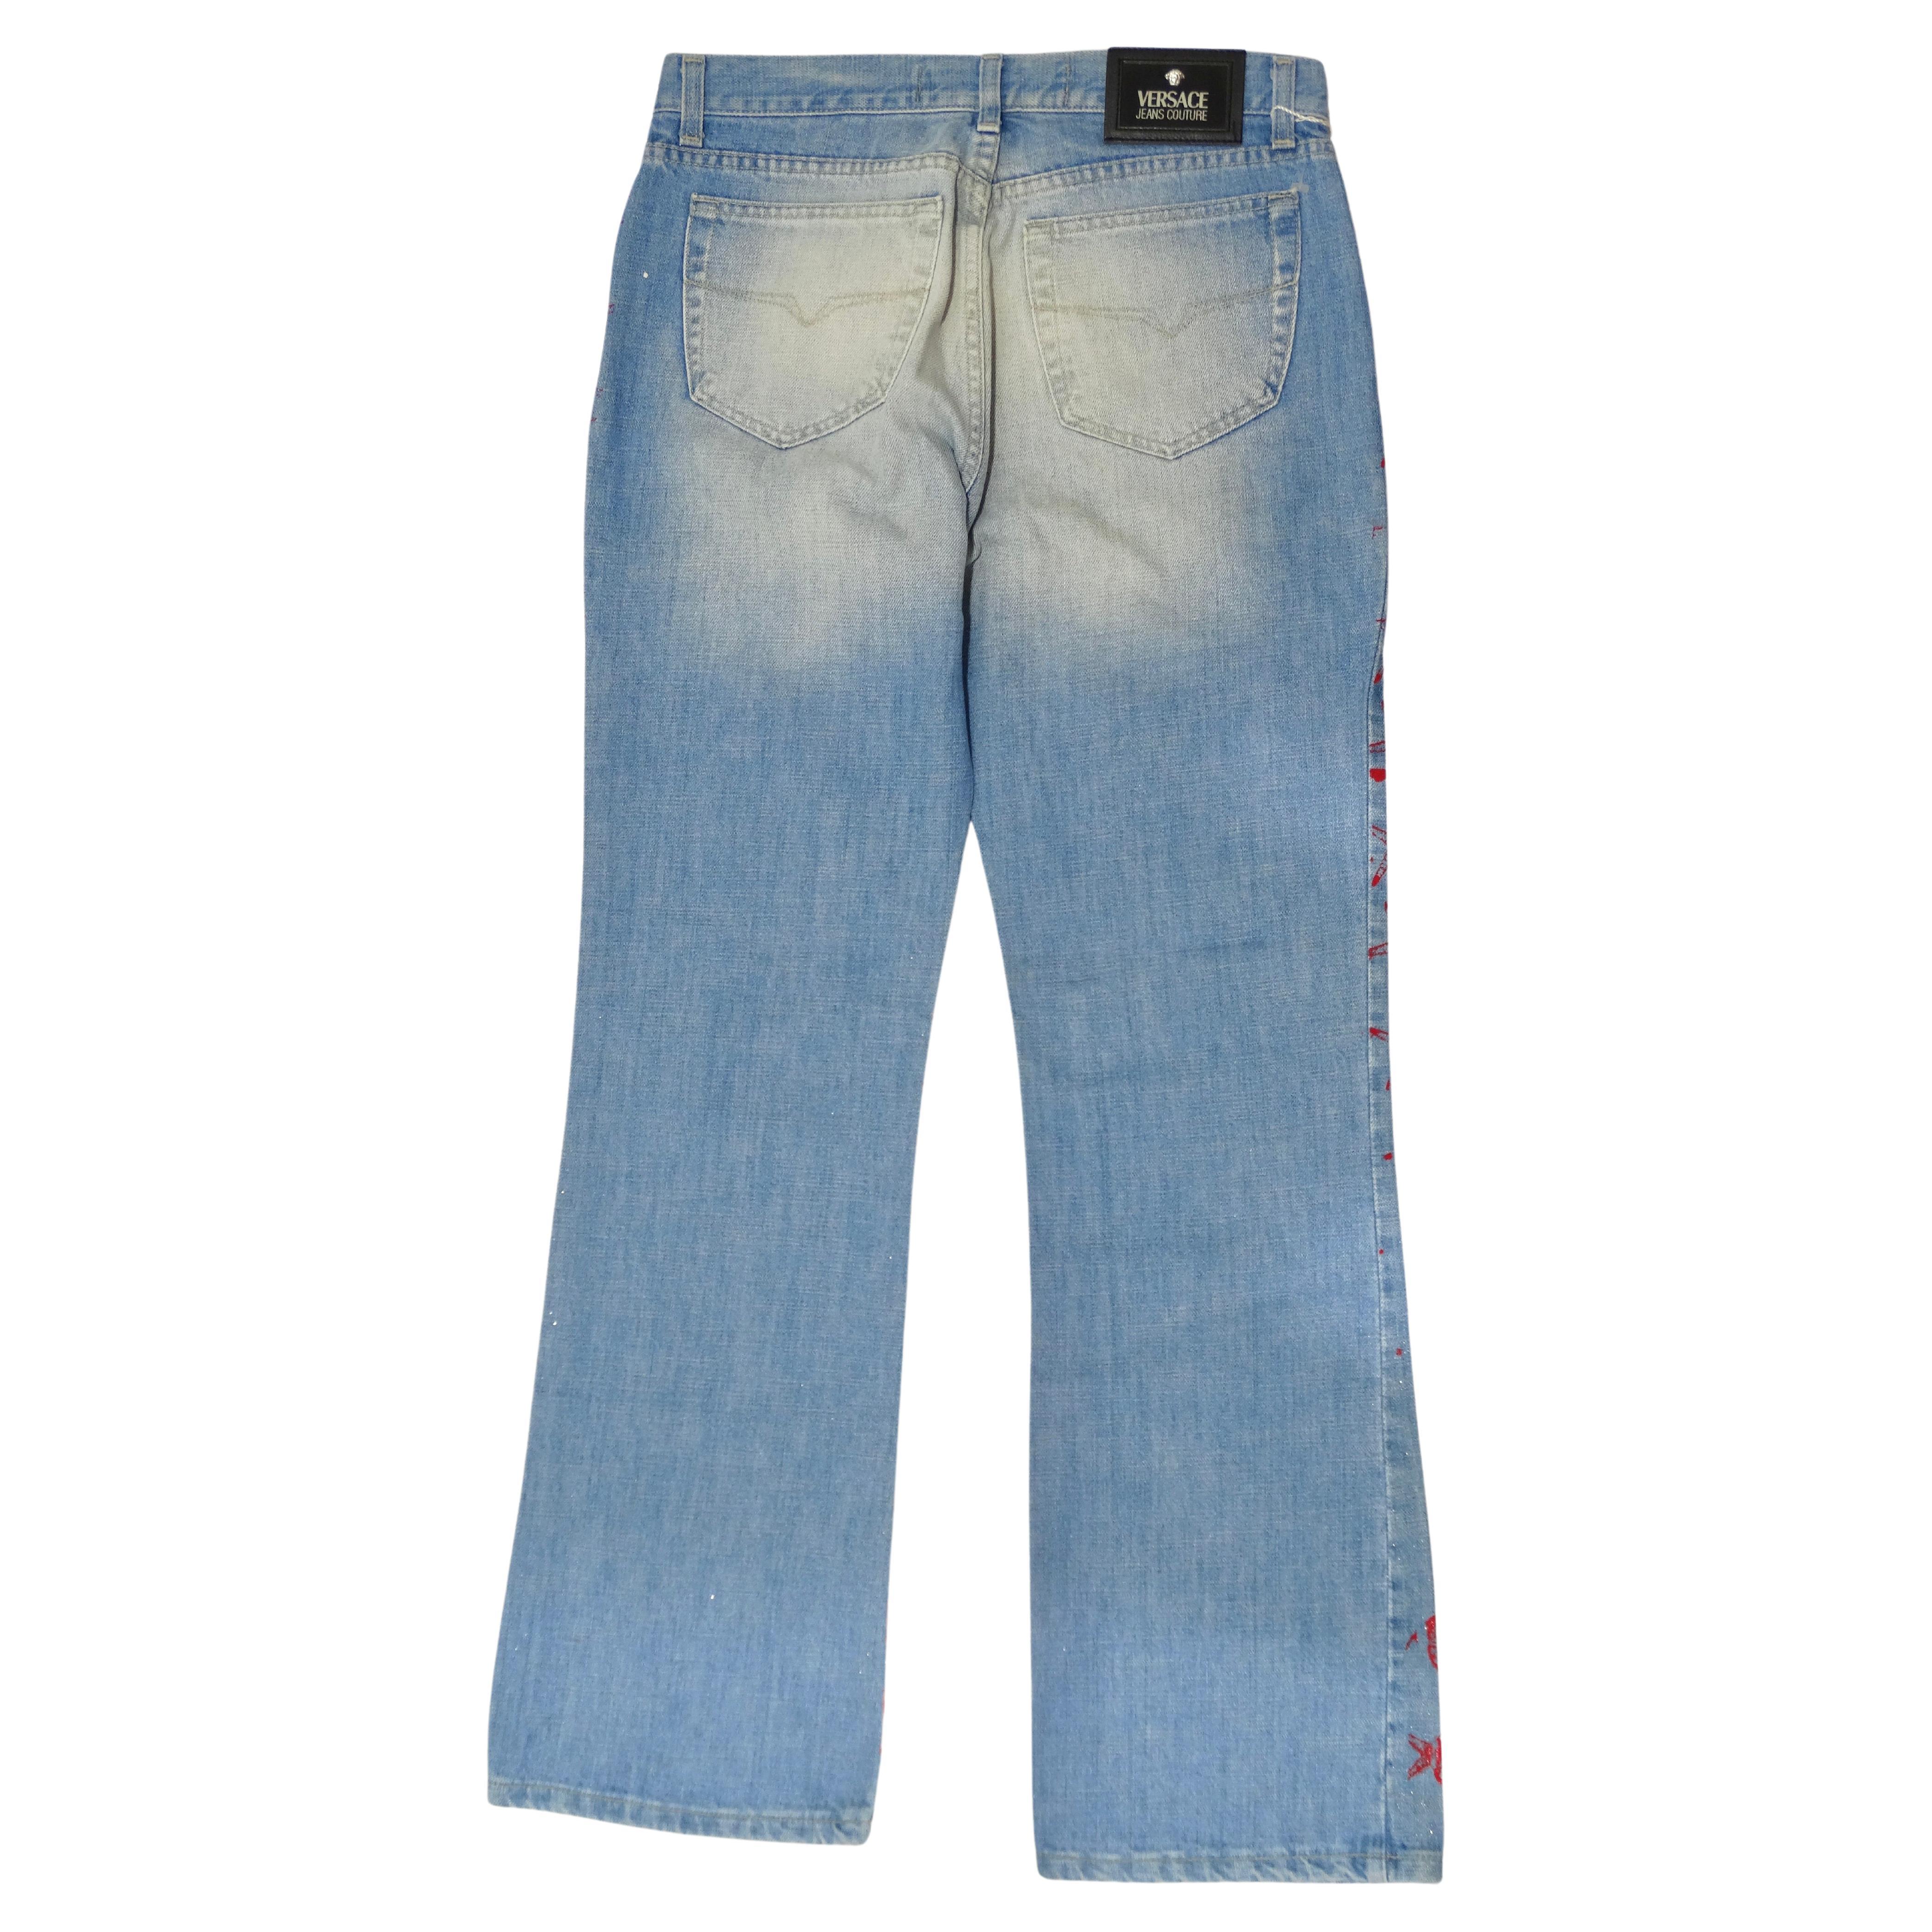 These Versace jeans speaks to the experimentation with denim in the 1990's. These jeans feature intentional distressing & fading, thick paint starfish print, & a moderate amount of glitter & bling. The fit is also signature 90s style, with bootcut